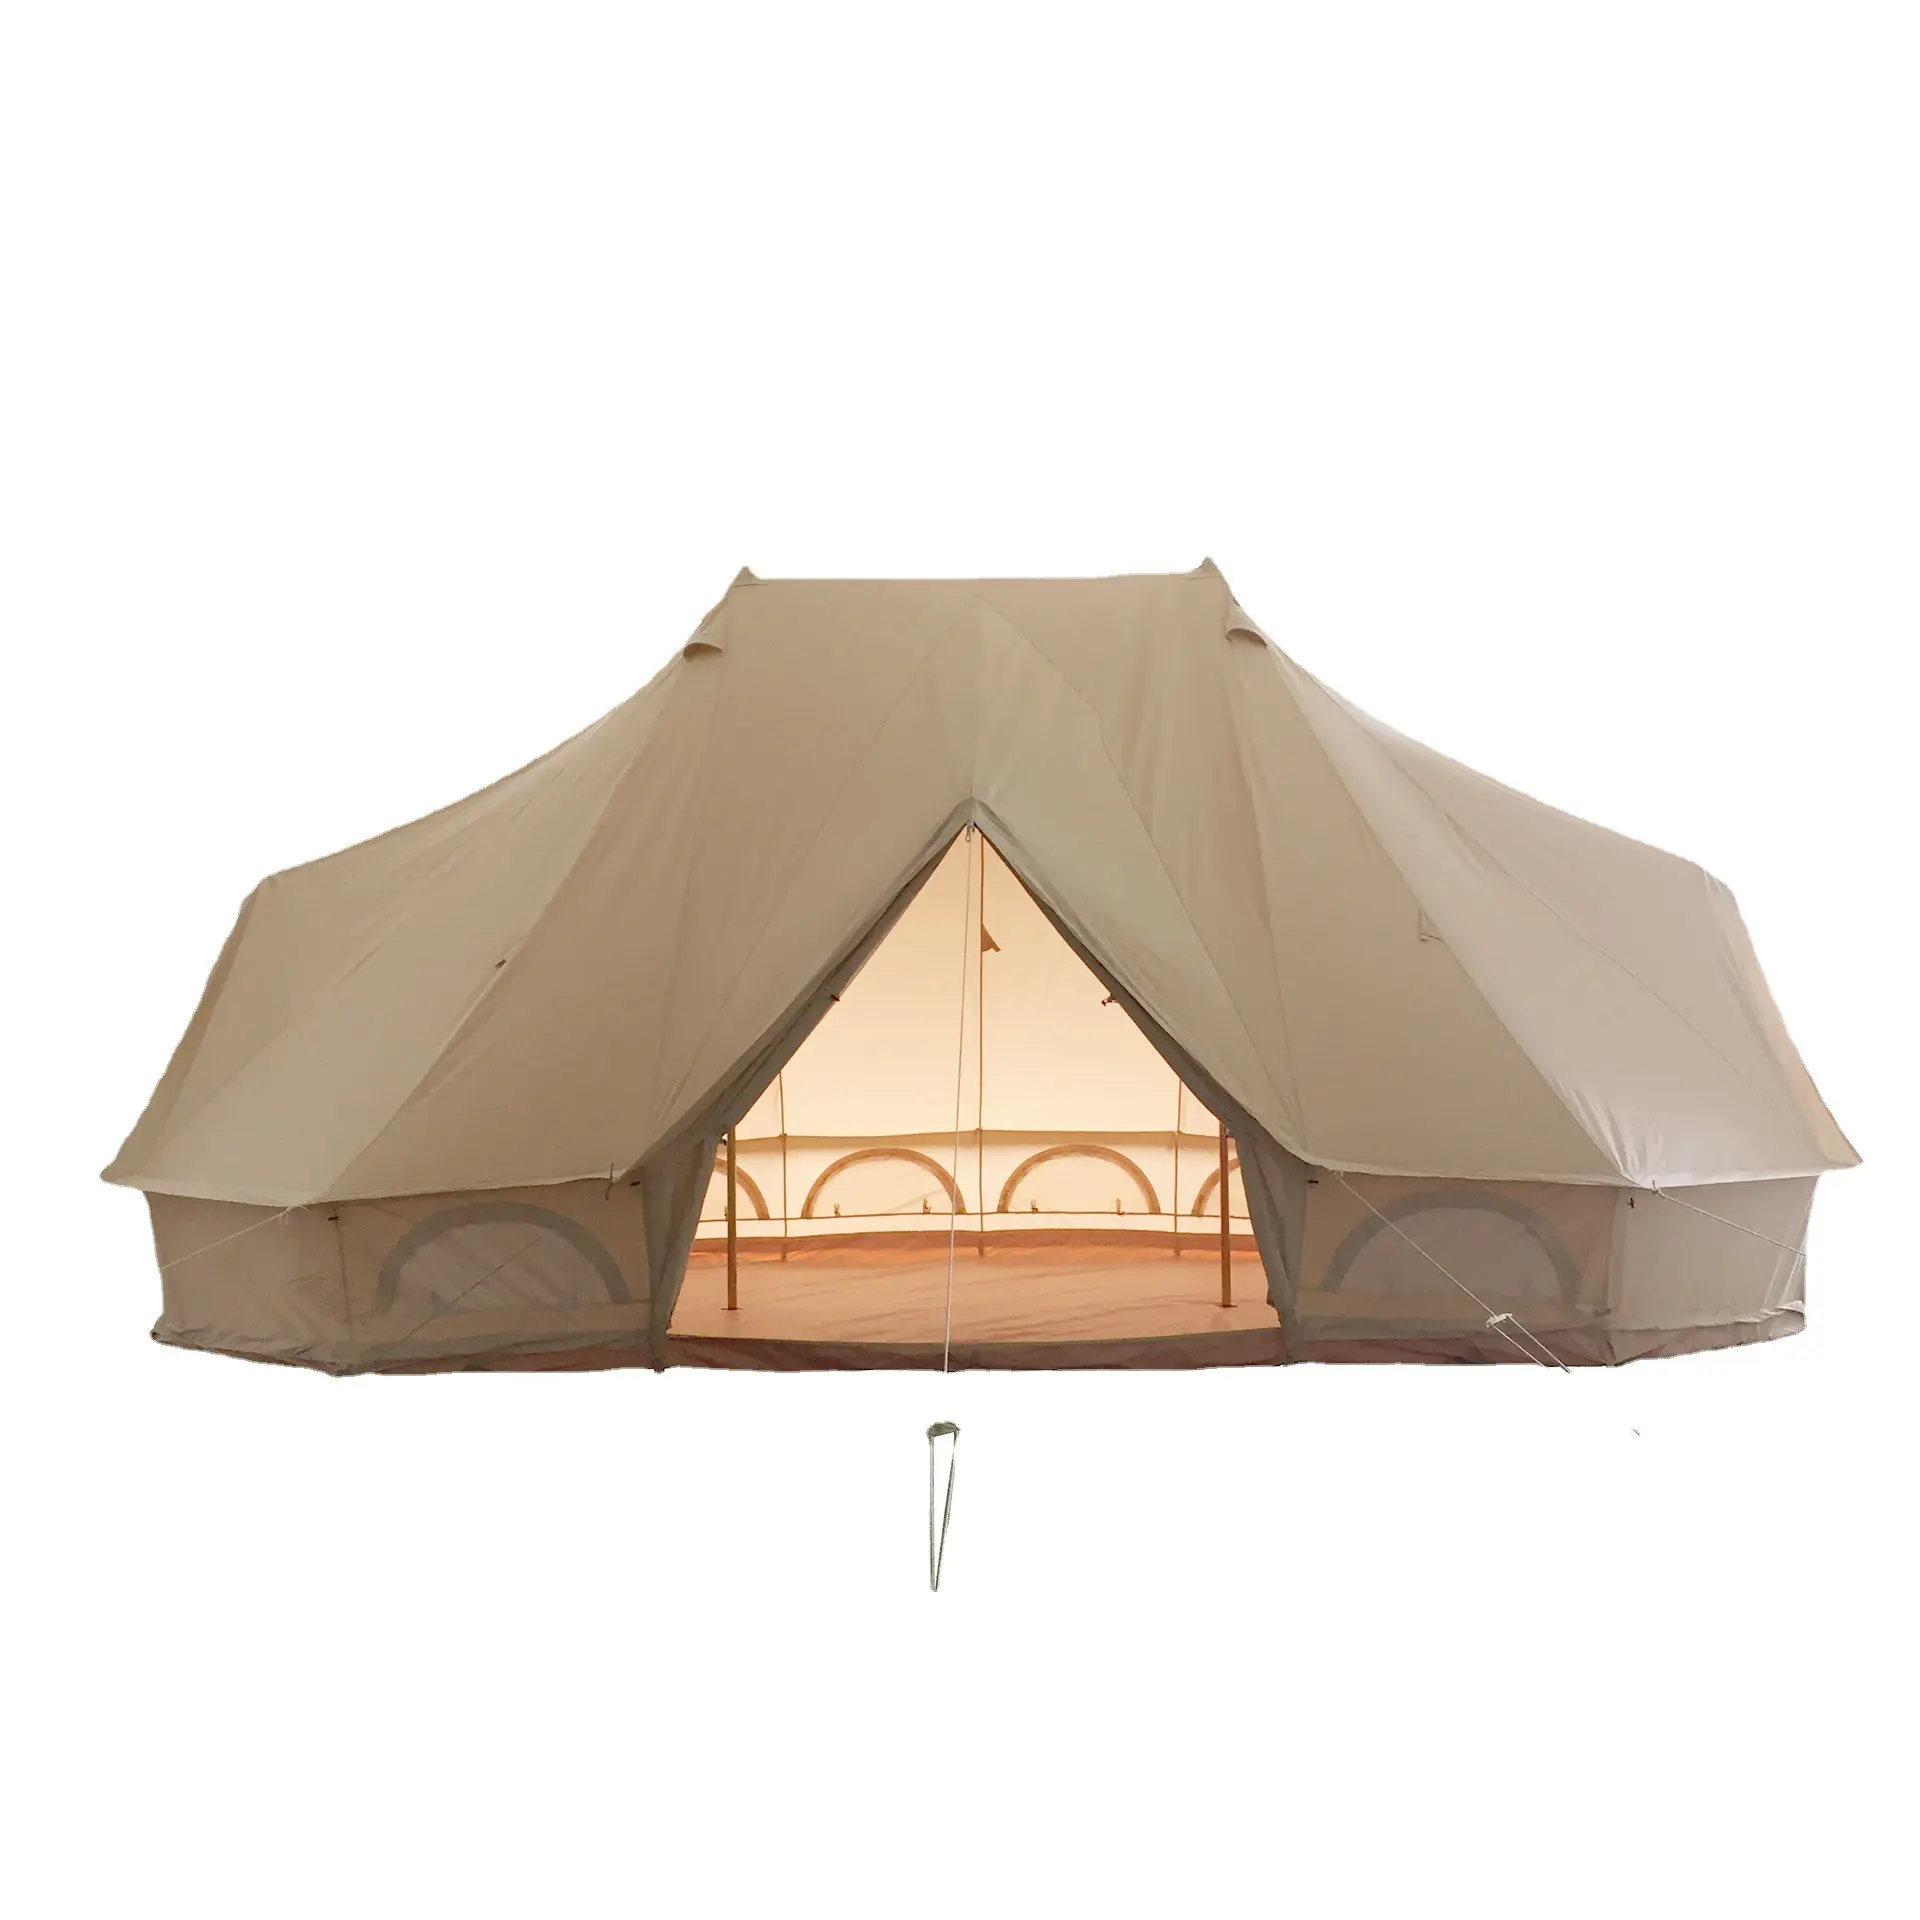 Outdoor Party Luxe Glamping Waterdichte Camping Keizer Bell Tent 6M Breed Twin Tower Canvas Tent